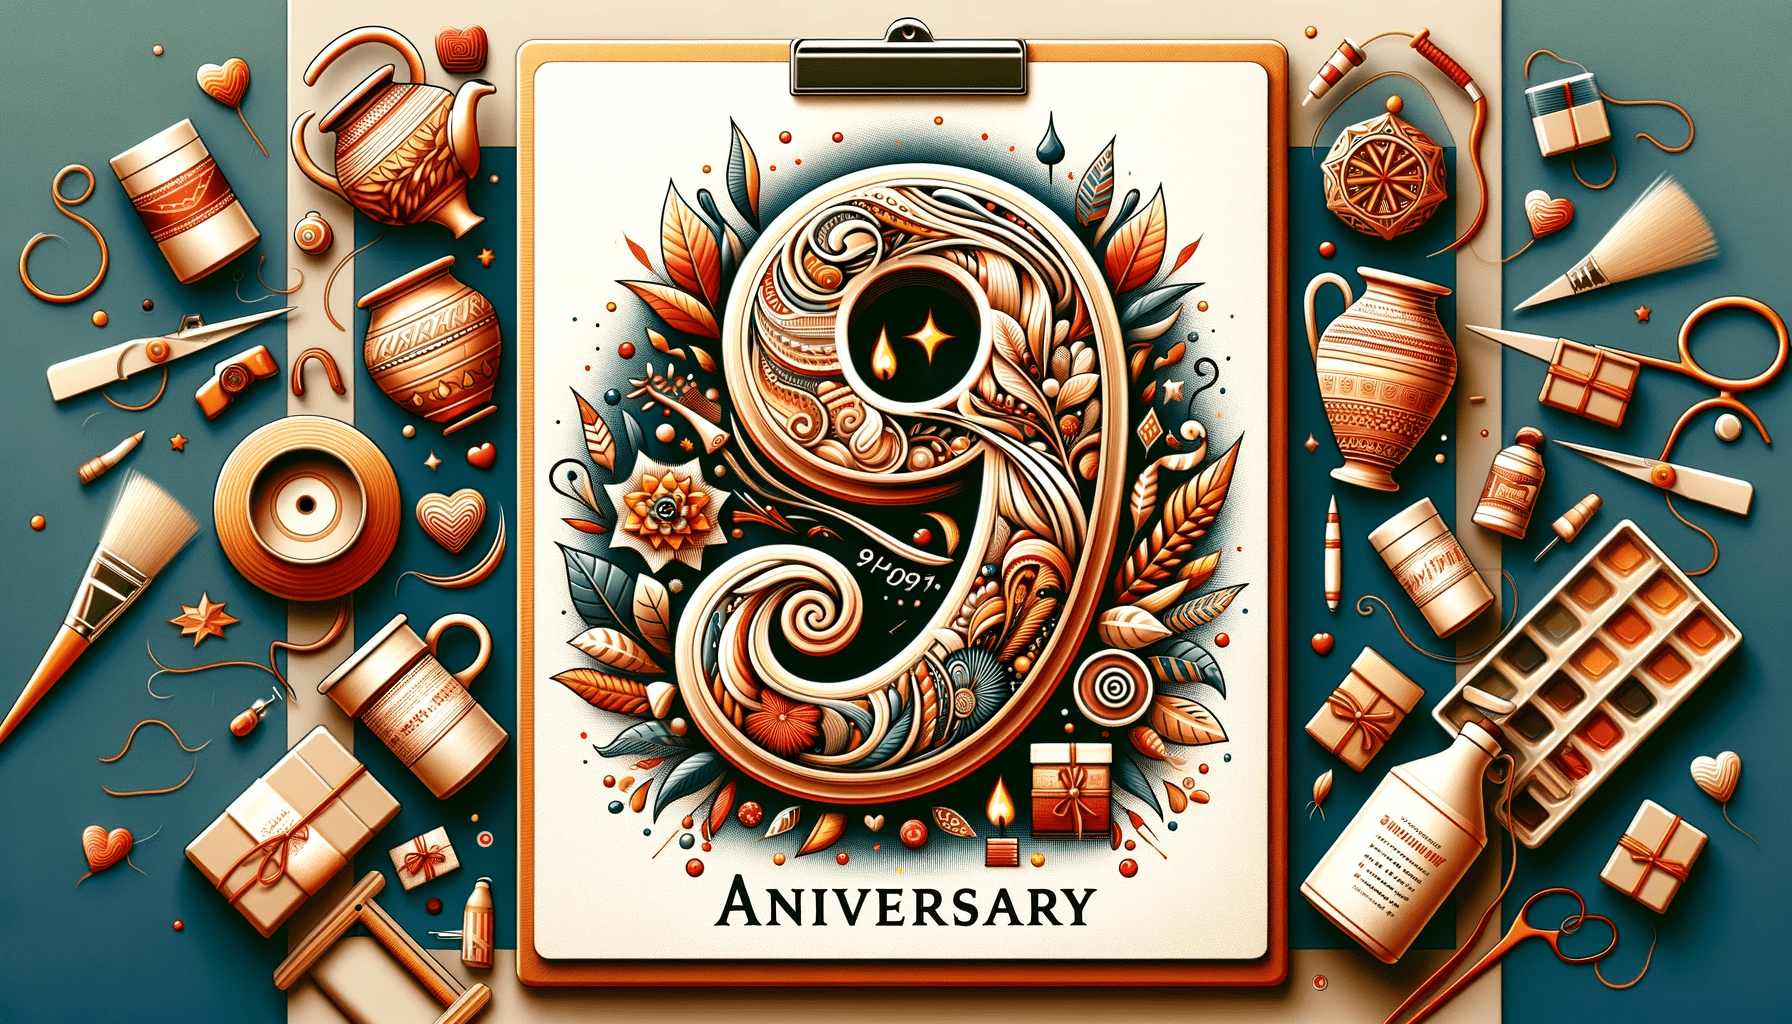 A creative and vibrant featured image for a social media article about 9th wedding anniversary, incorporating elements that symbolize traditional